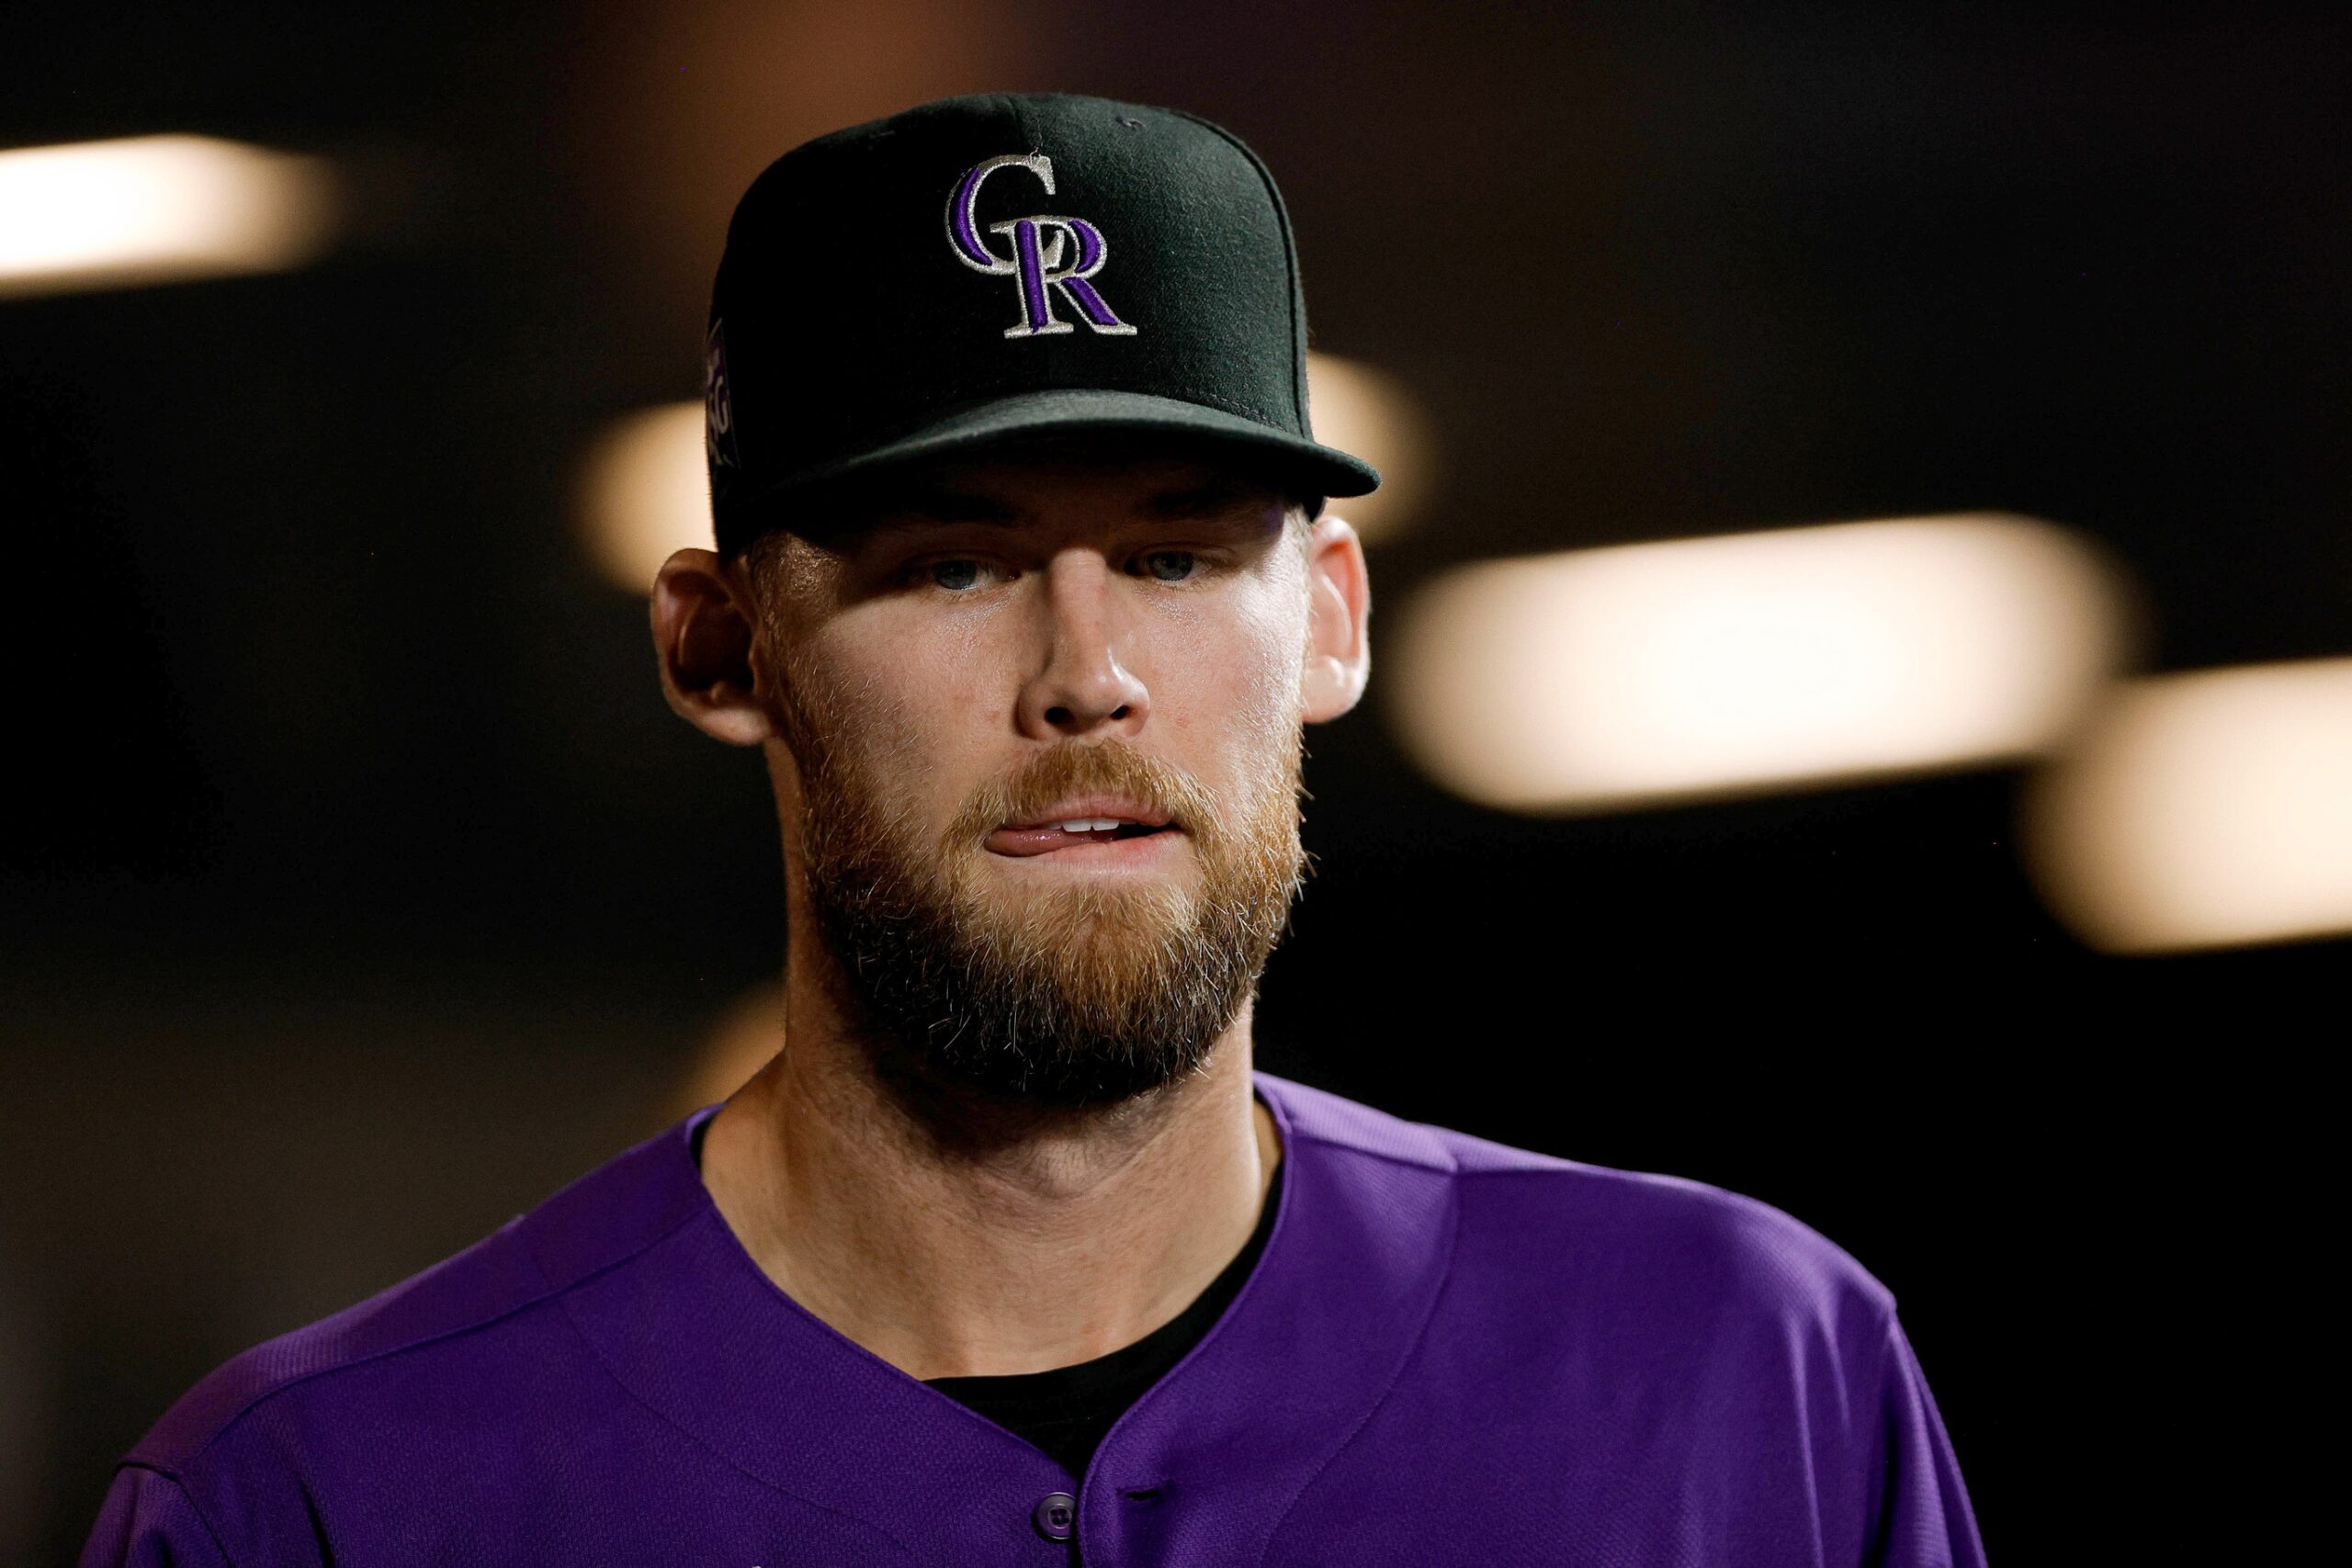 Colorado Rockies: What will their bullpen look like now?